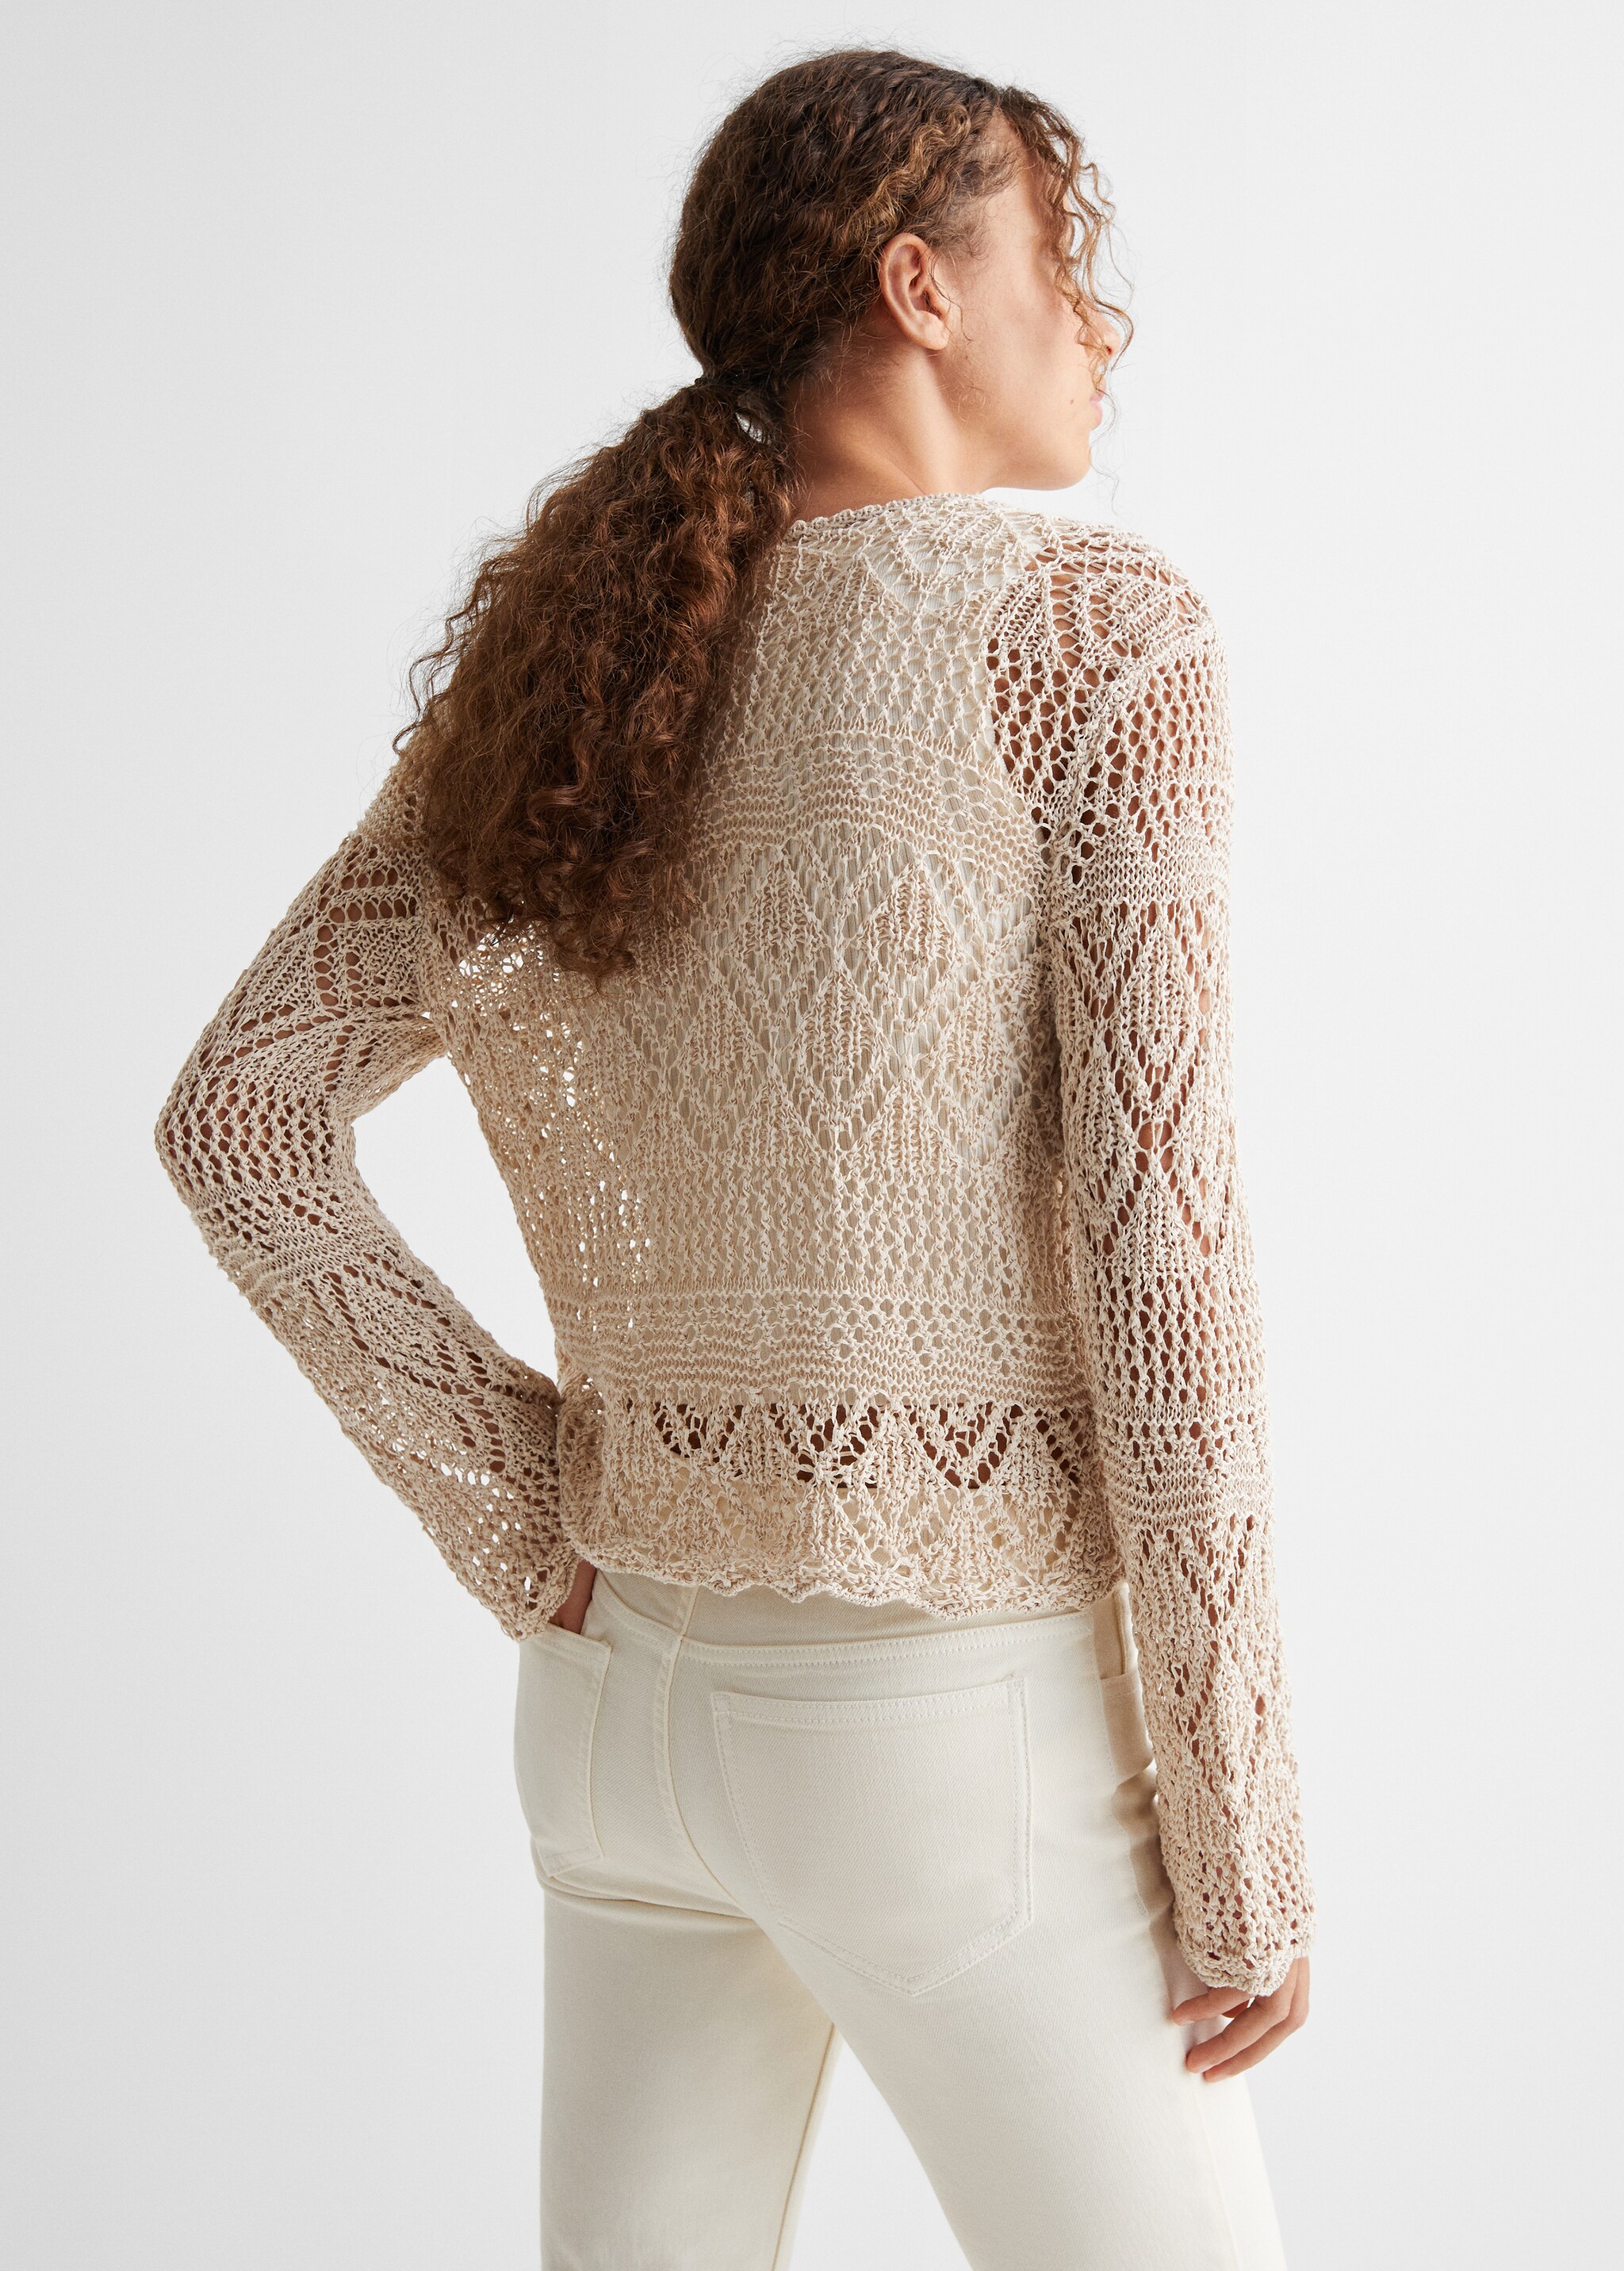 Openwork knit sweater - Reverse of the article